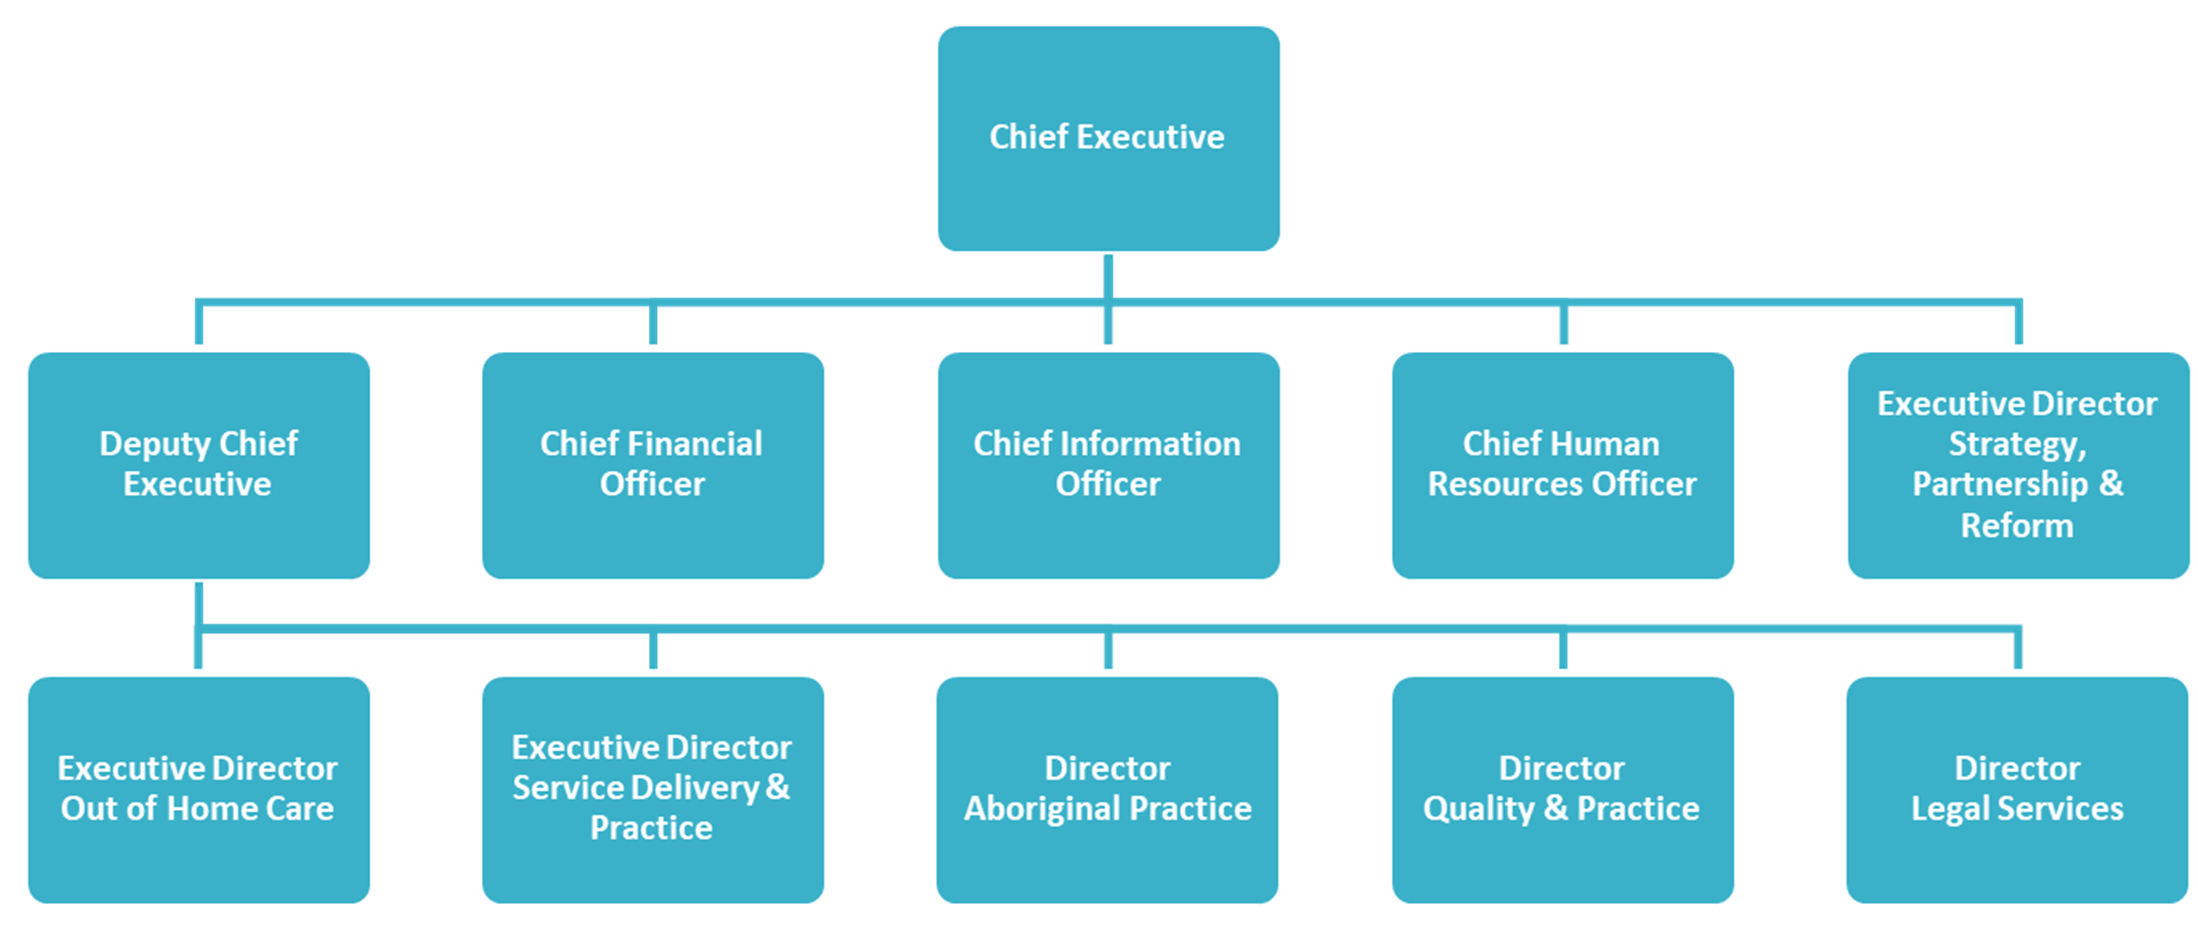 DCP organisational structure